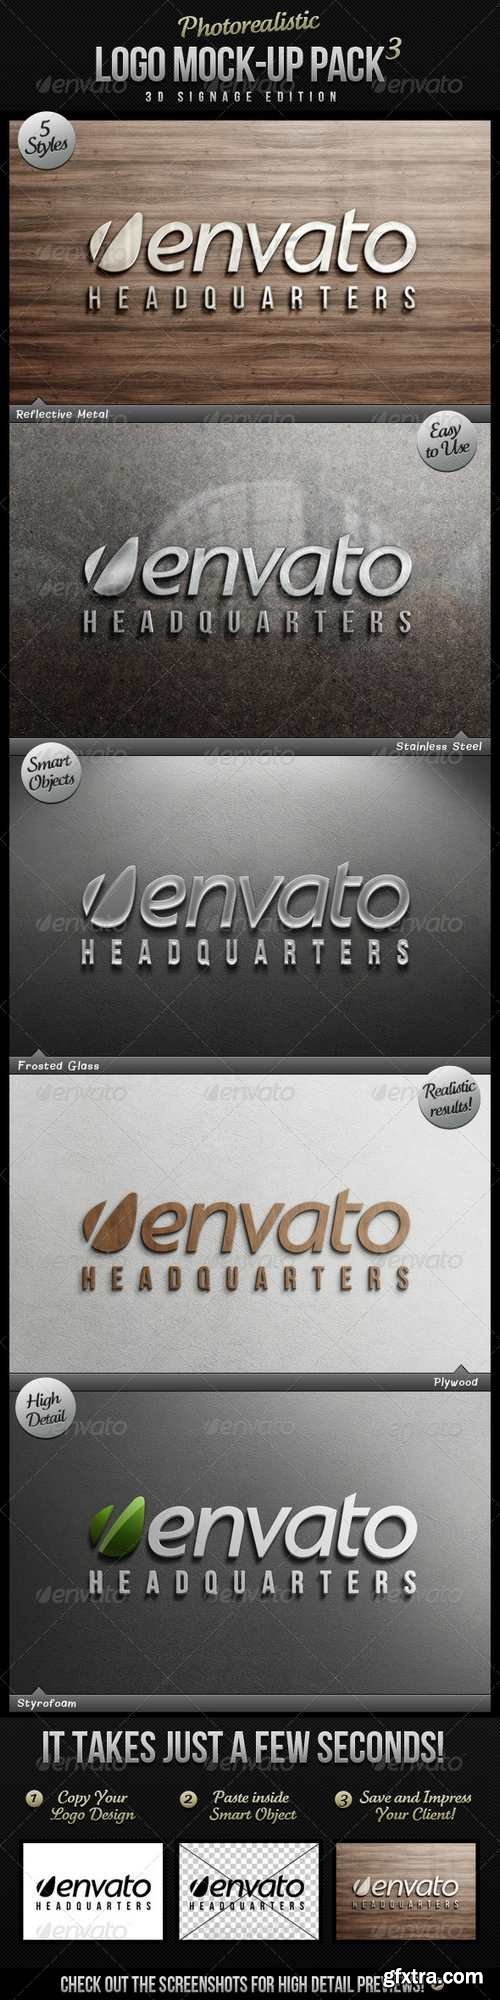 Graphicriver Photorealistic Logo Mock-Up Pack 3 2564243